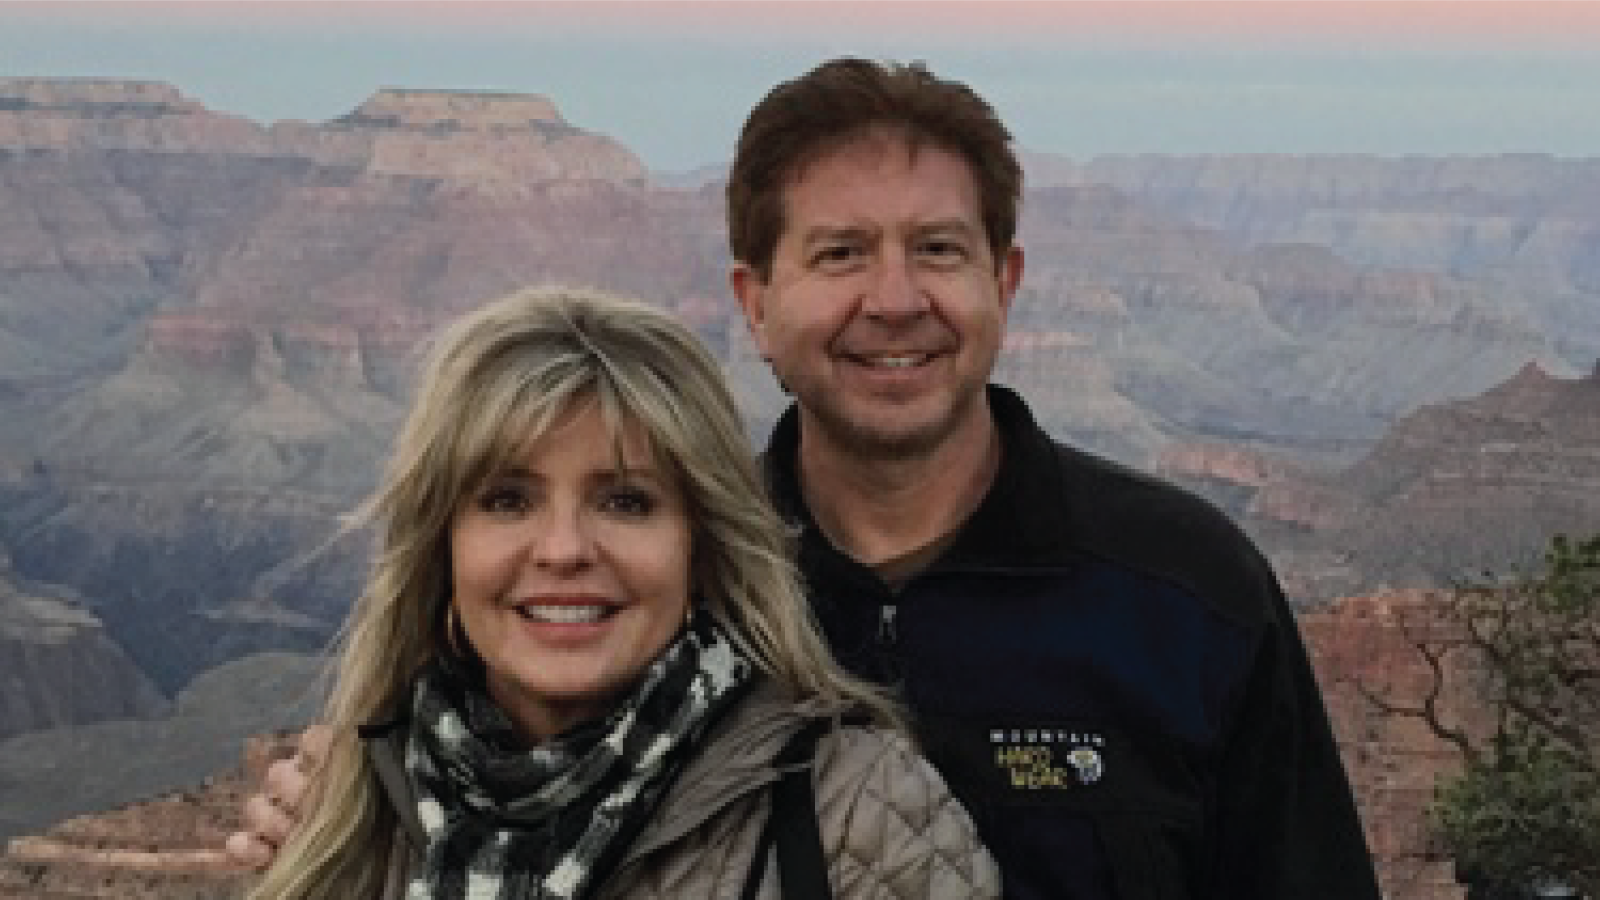 Jim Geitgey and his wife in front of the Grand Canyon